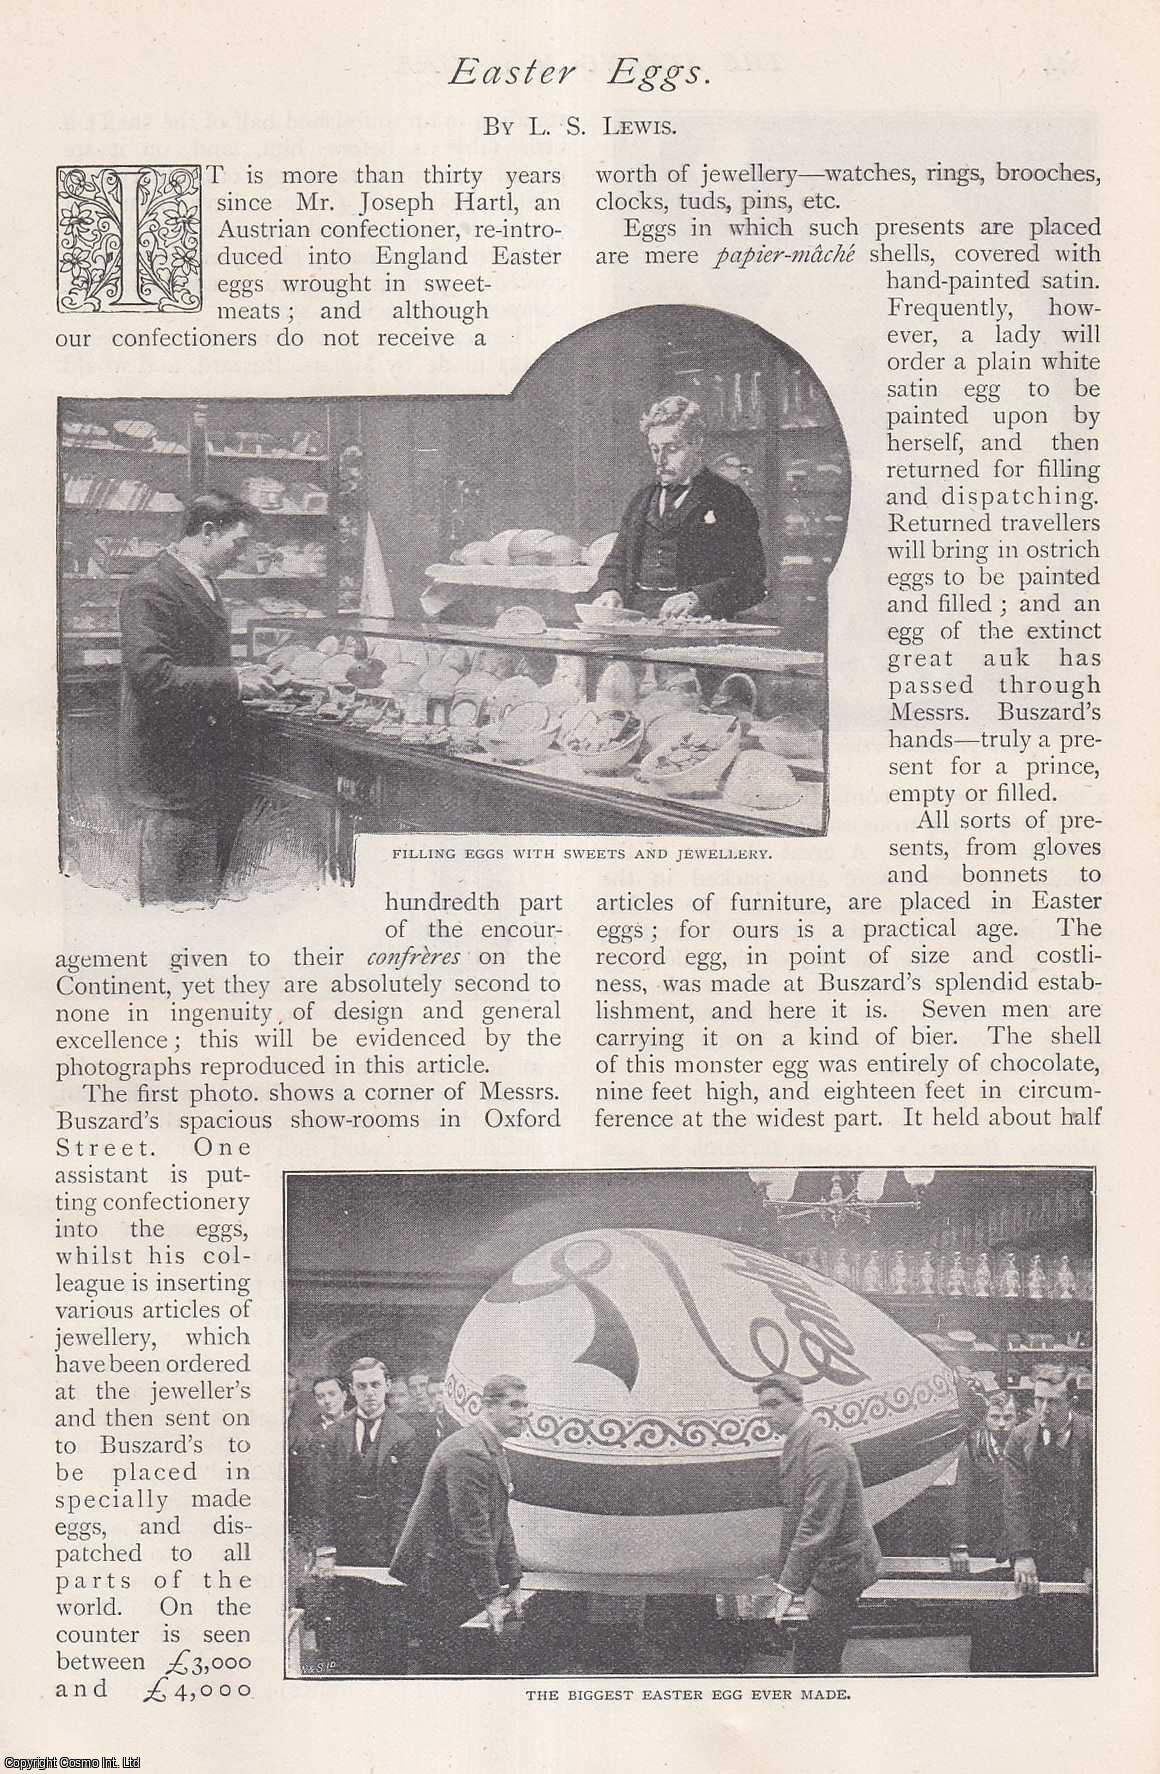 C.E. Lewis - Easter Eggs : More Than Thirty Years Since Mr. Joseph Hartl, an Austrian Confectioner, Re-Introduced in England Easter Eggs. An uncommon original article from The Strand Magazine, 1897.